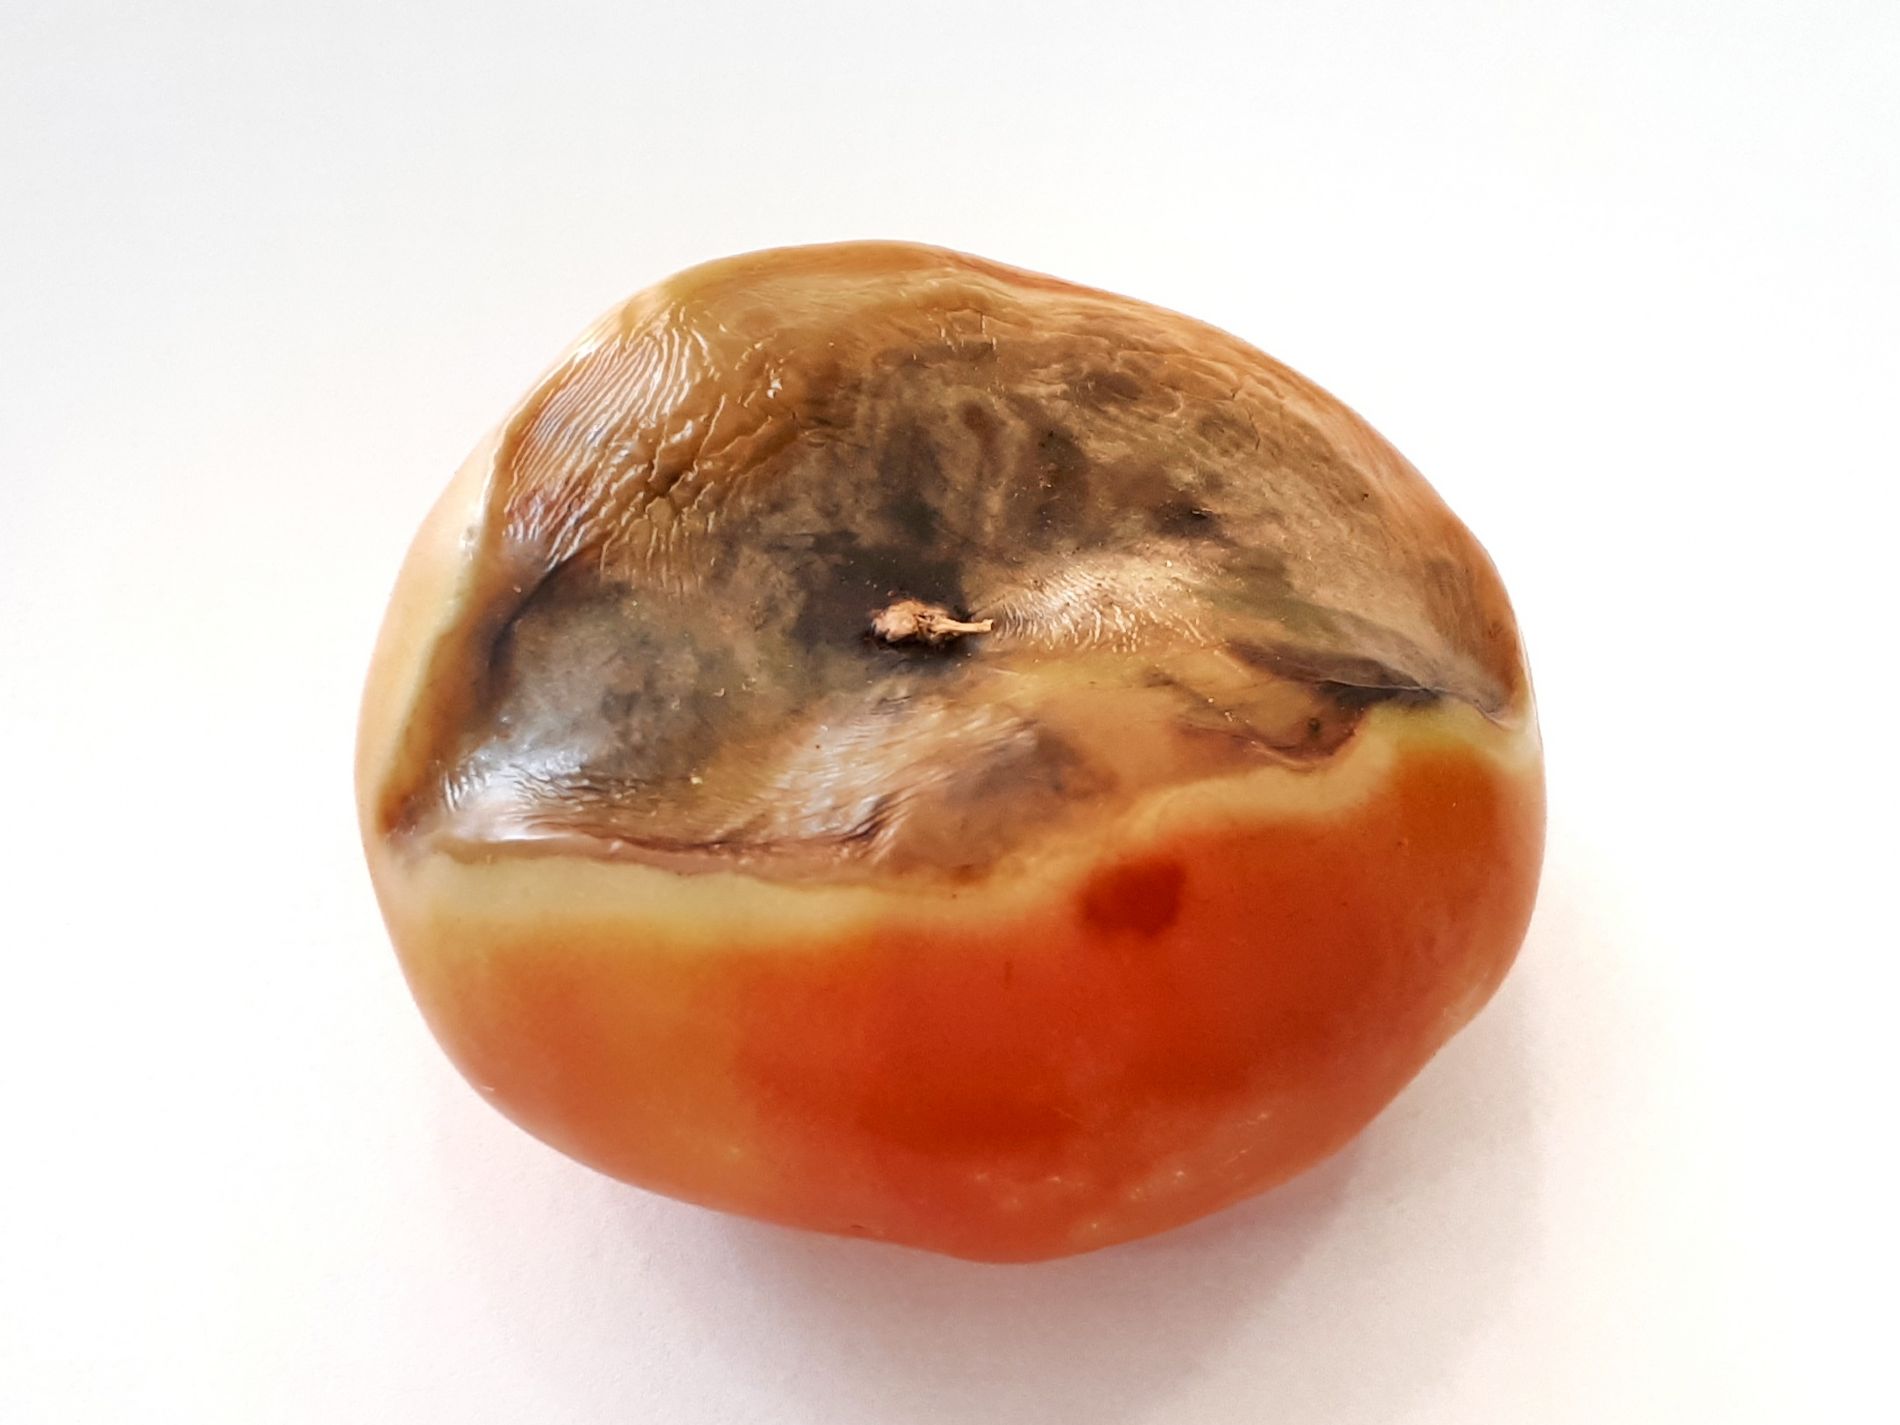 Blossom end rot tomate